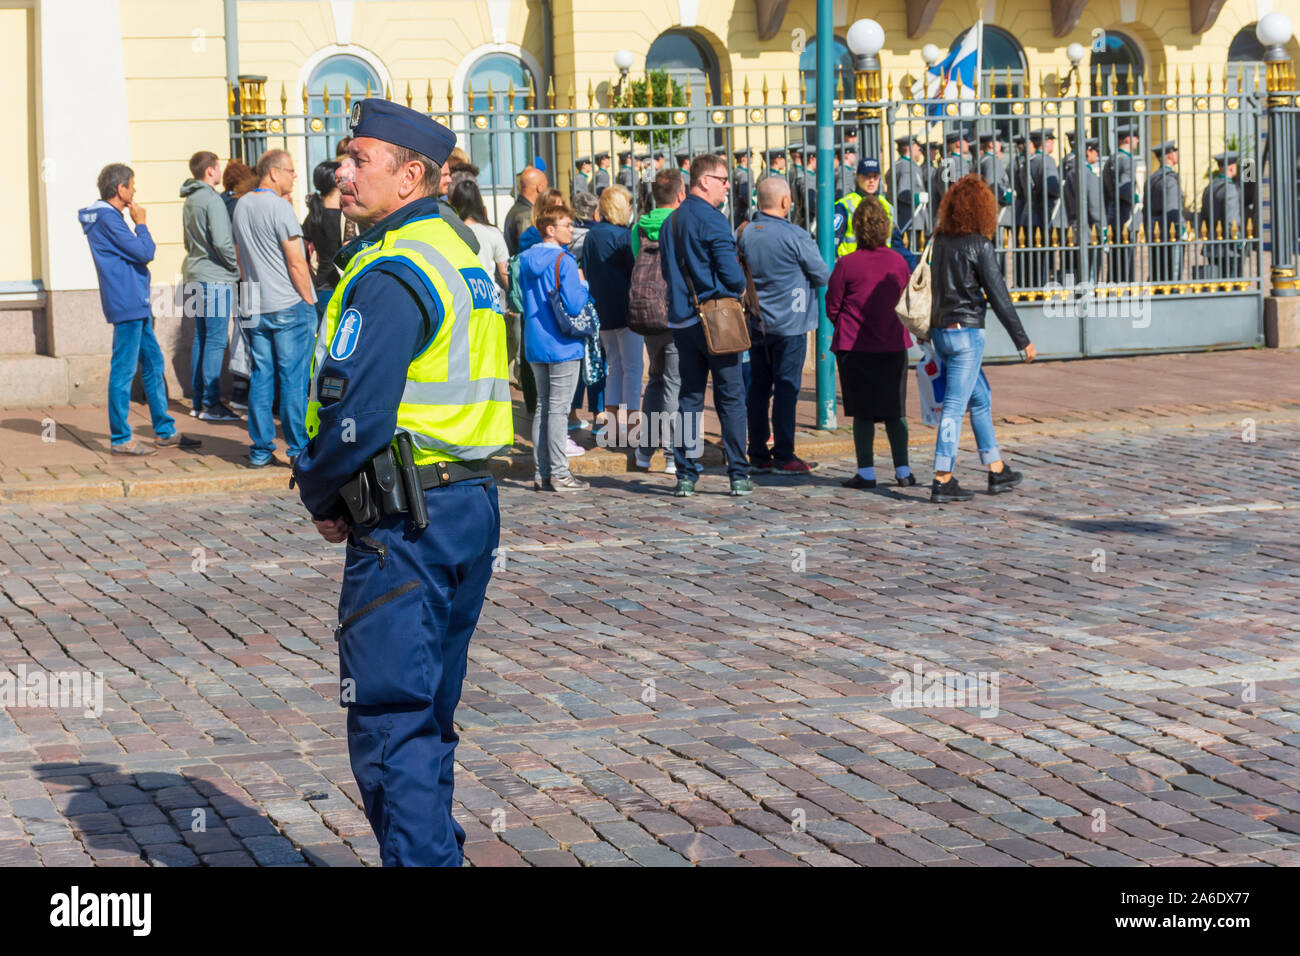 Polceman on duty in front of the Presidential palace in Helsinki Finland Stock Photo